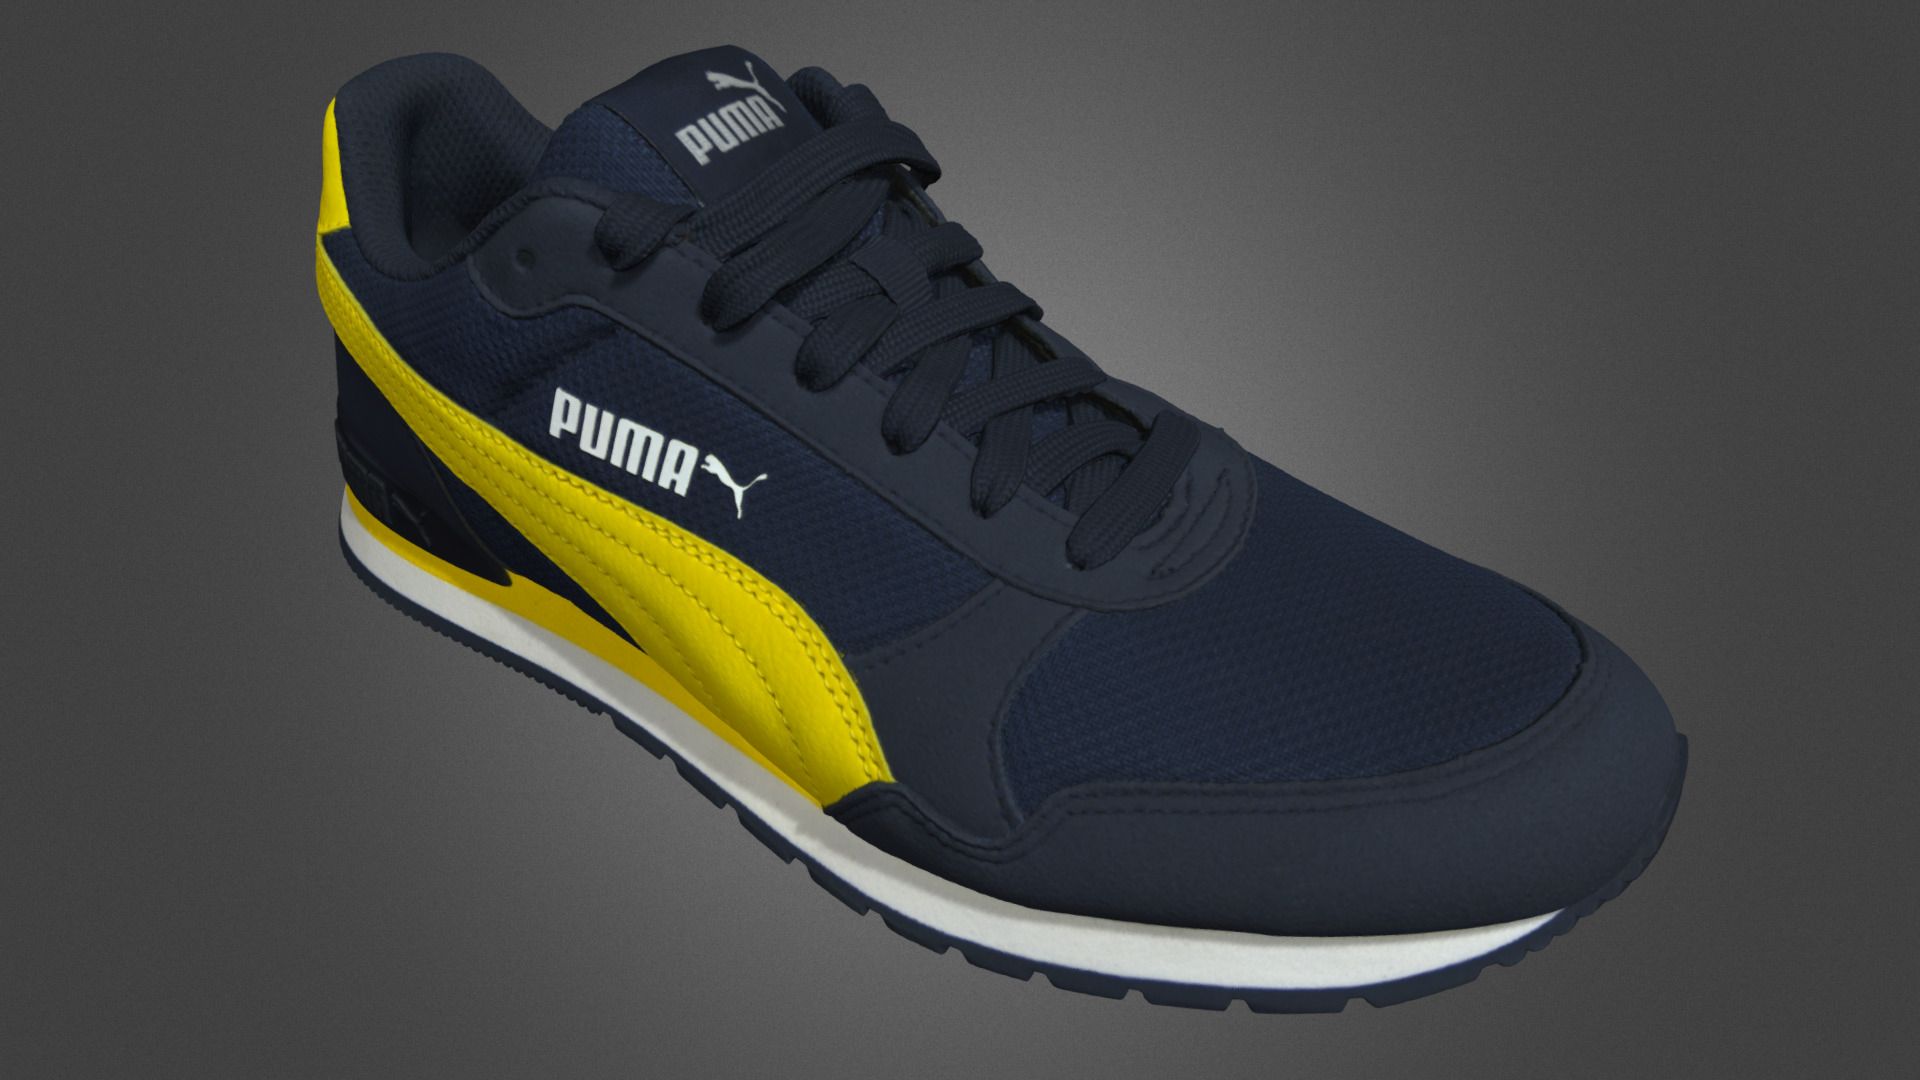 3D model Puma ST Runner - This is a 3D model of the Puma ST Runner. The 3D model is about a black and yellow shoe.